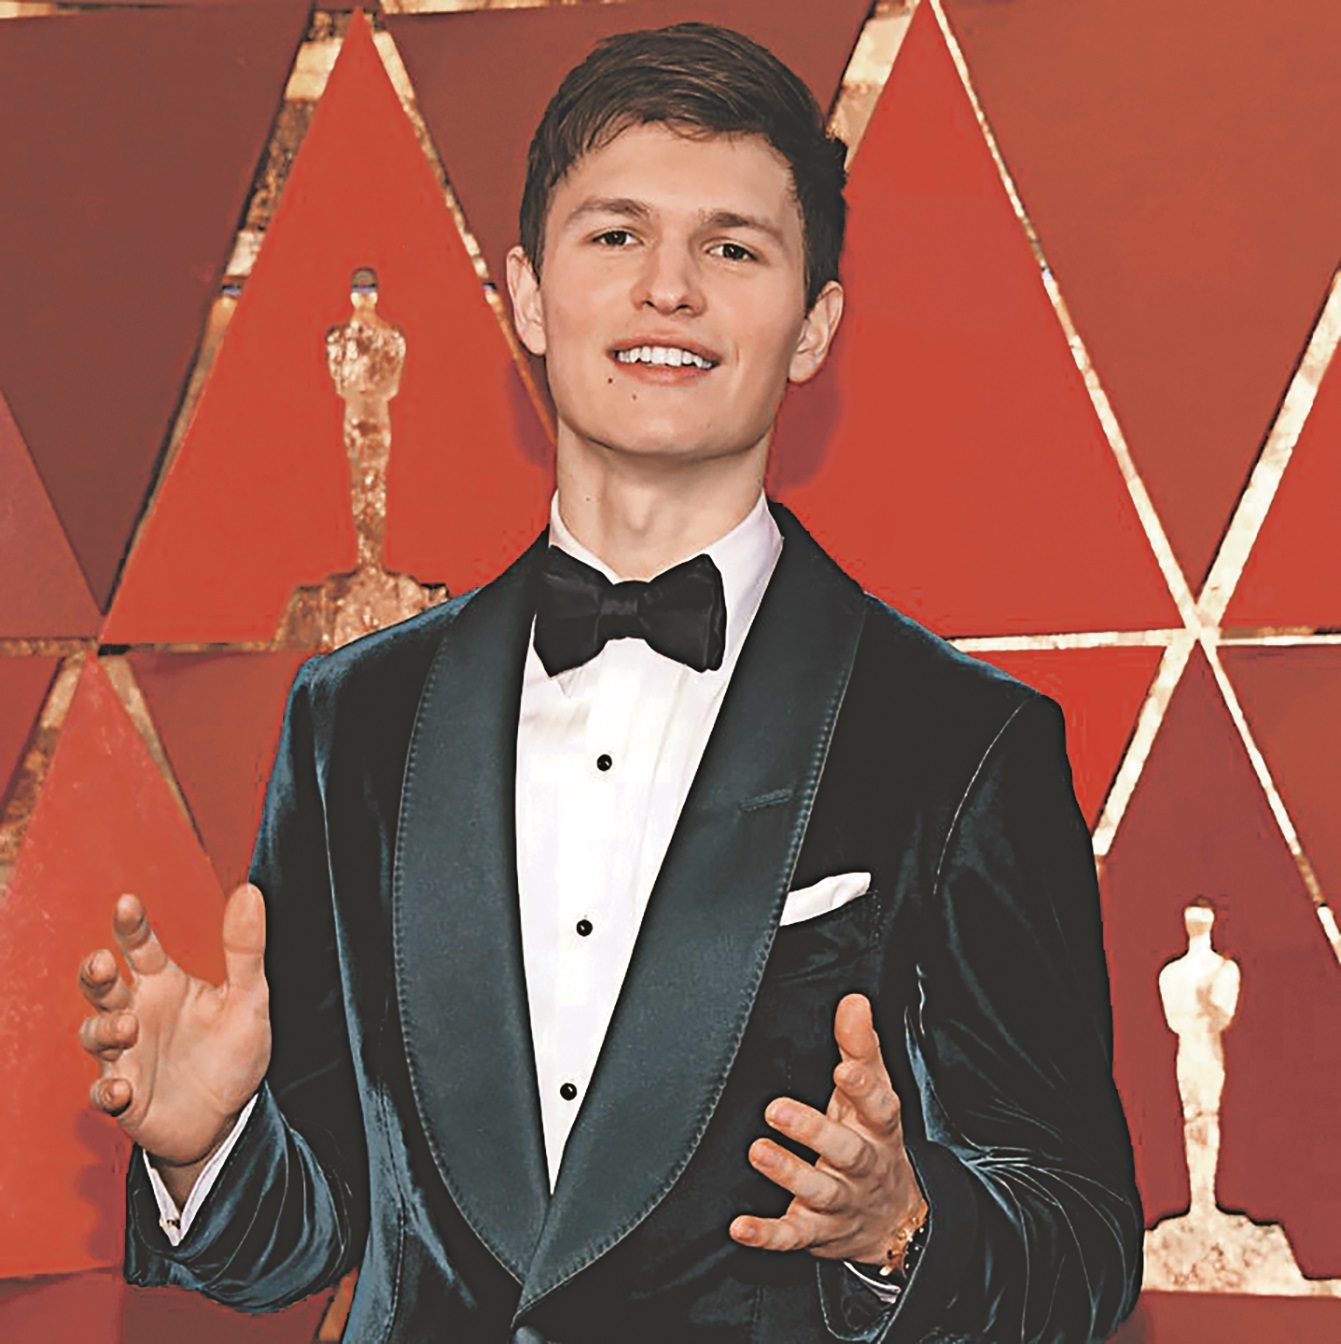 ansel-elgort-attends-the-90th-annual-academy-awards-at-news-photo-927254460-1538434574.jpg